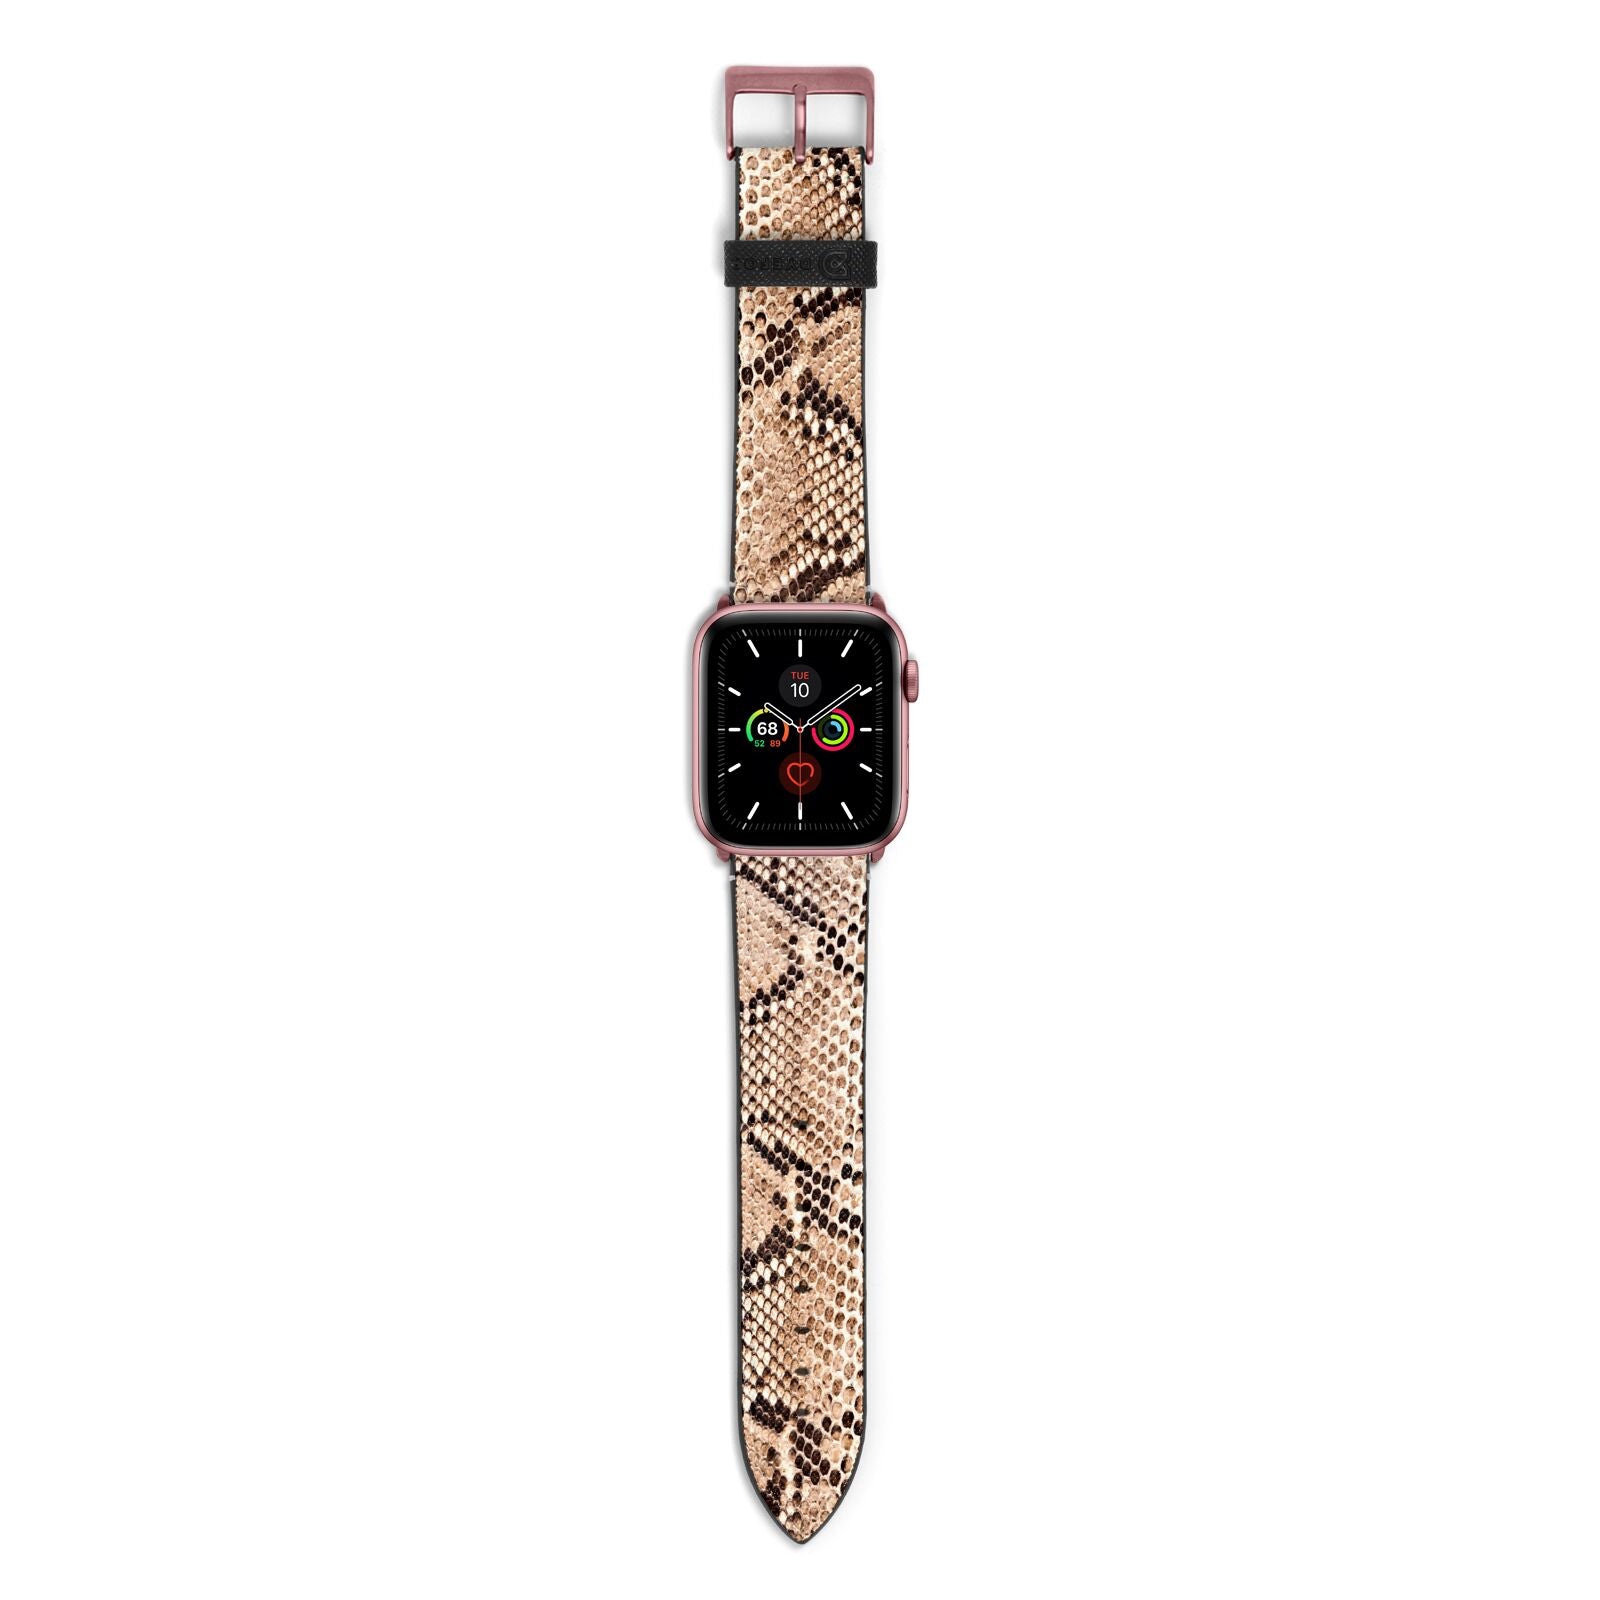 Snakeskin Apple Watch Strap with Rose Gold Hardware